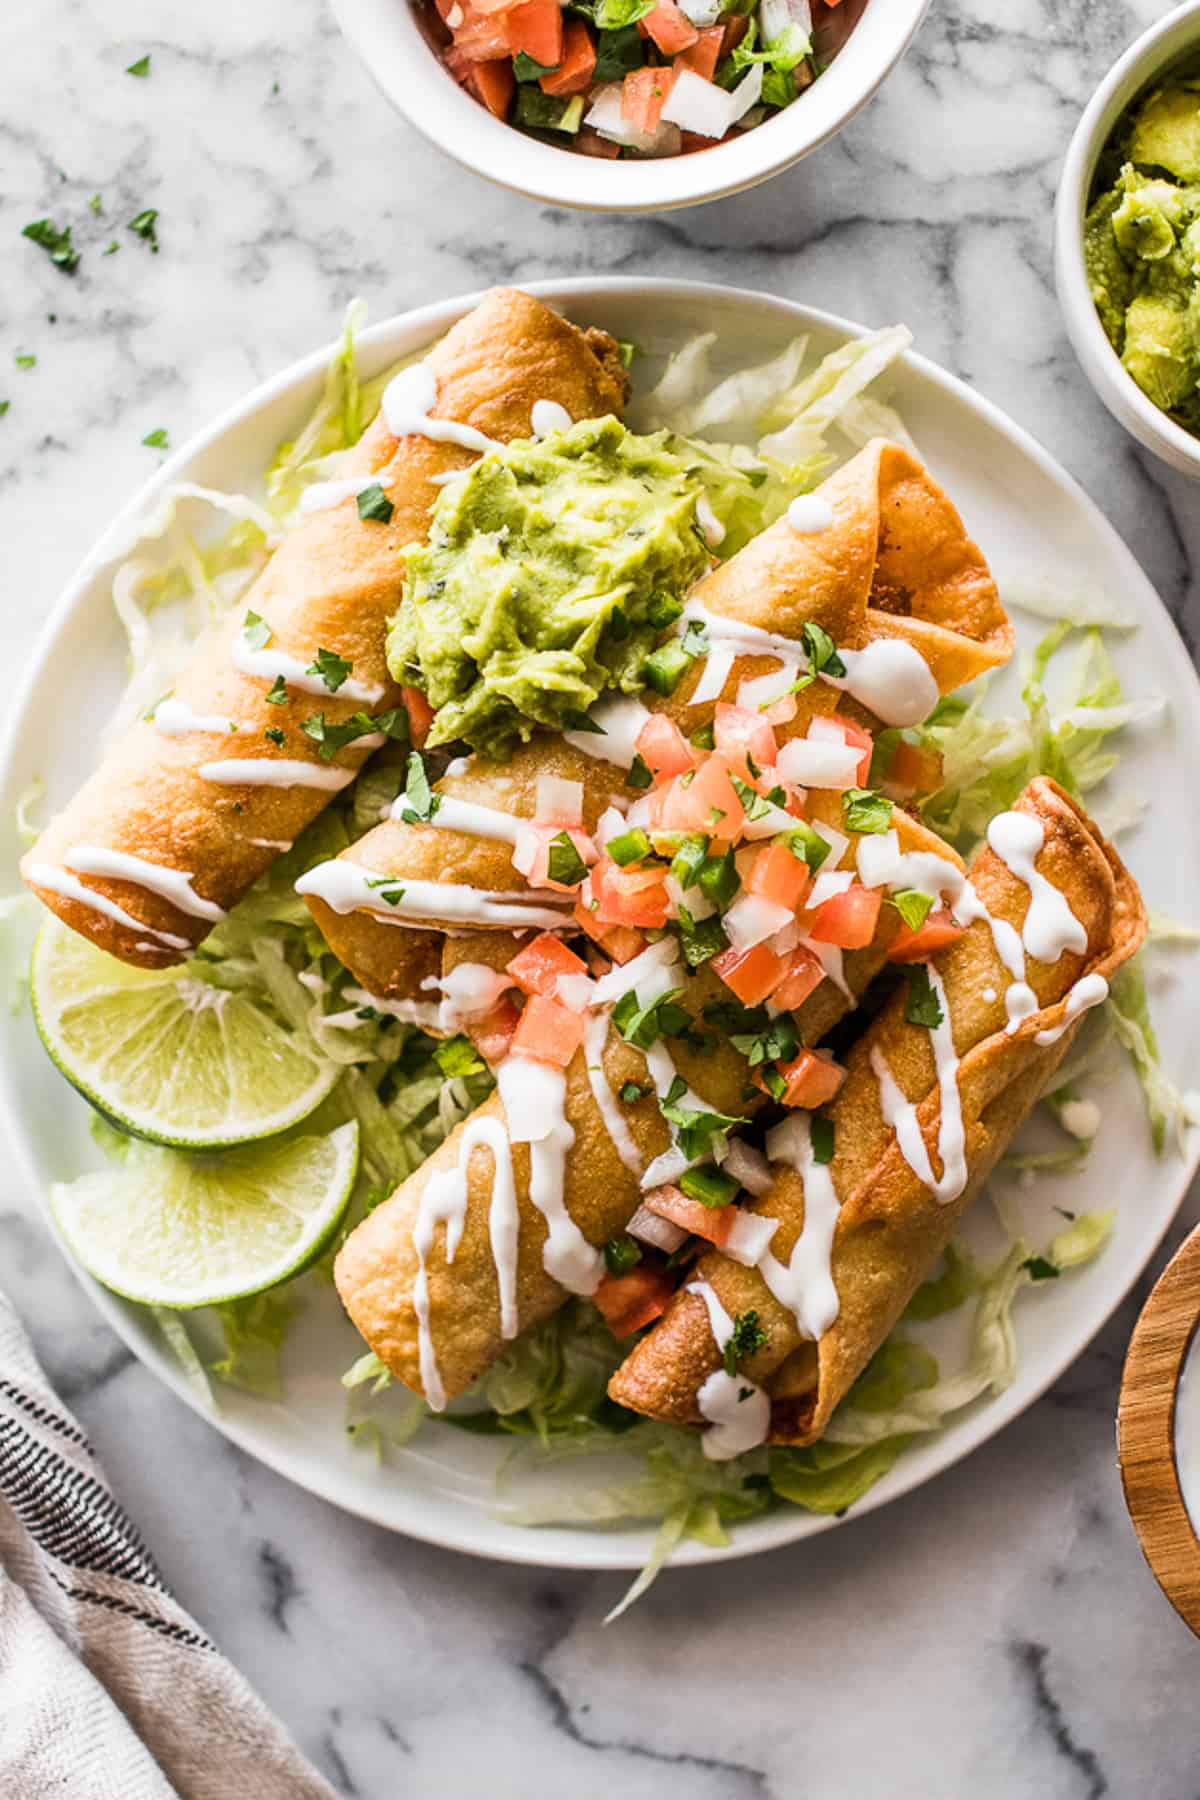 Chicken taquitos on a plate topped with guacamole and pico de gallo.